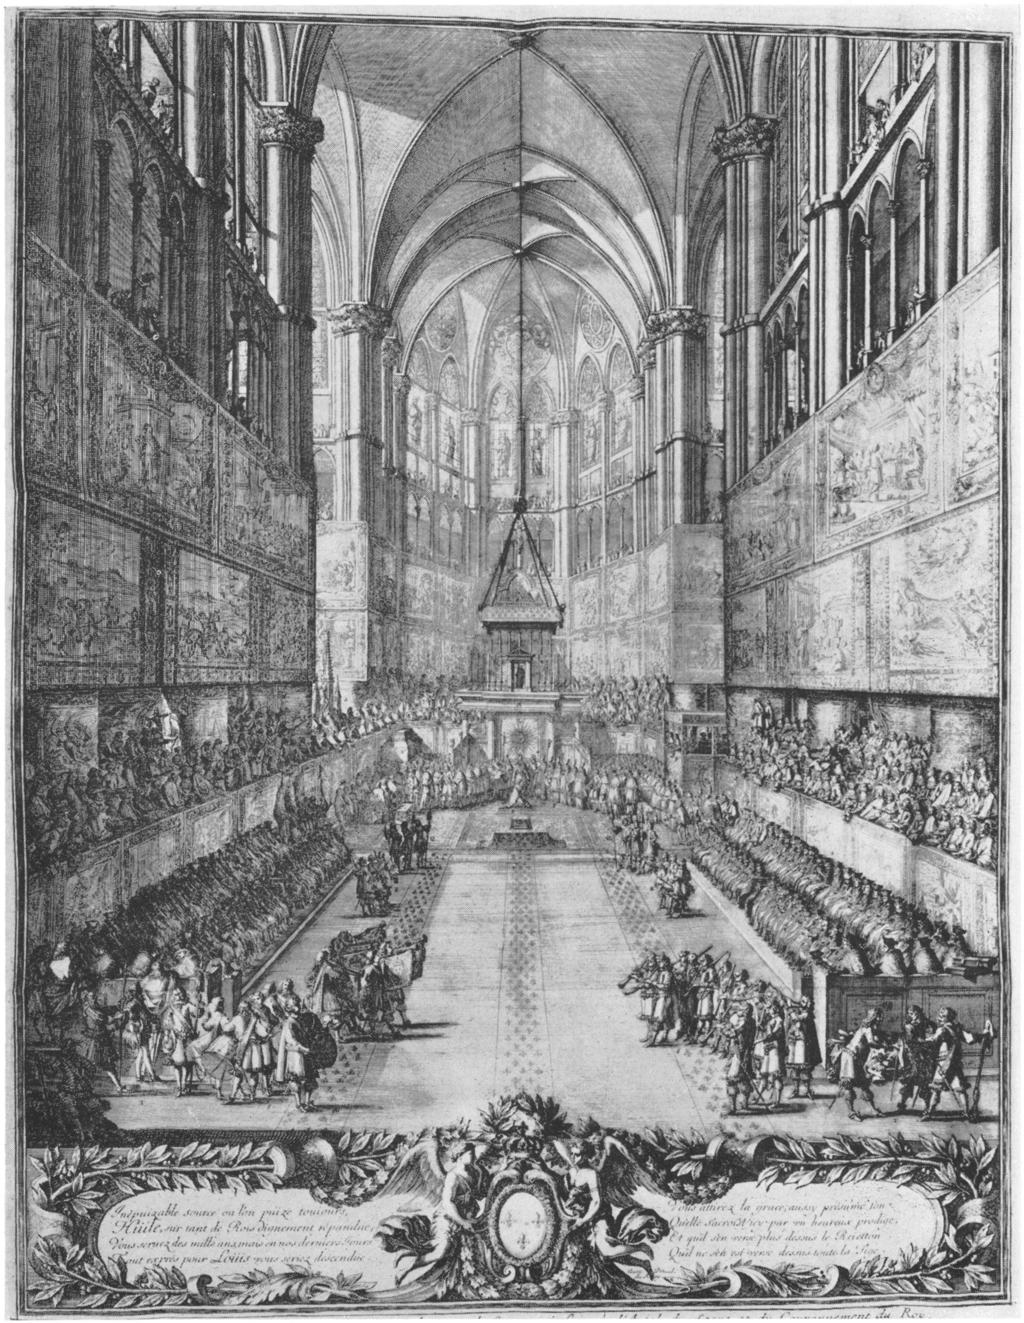 The coronationof Louis XIV in Rheims cathedral in 1654, engravings by ean Le Pautre.